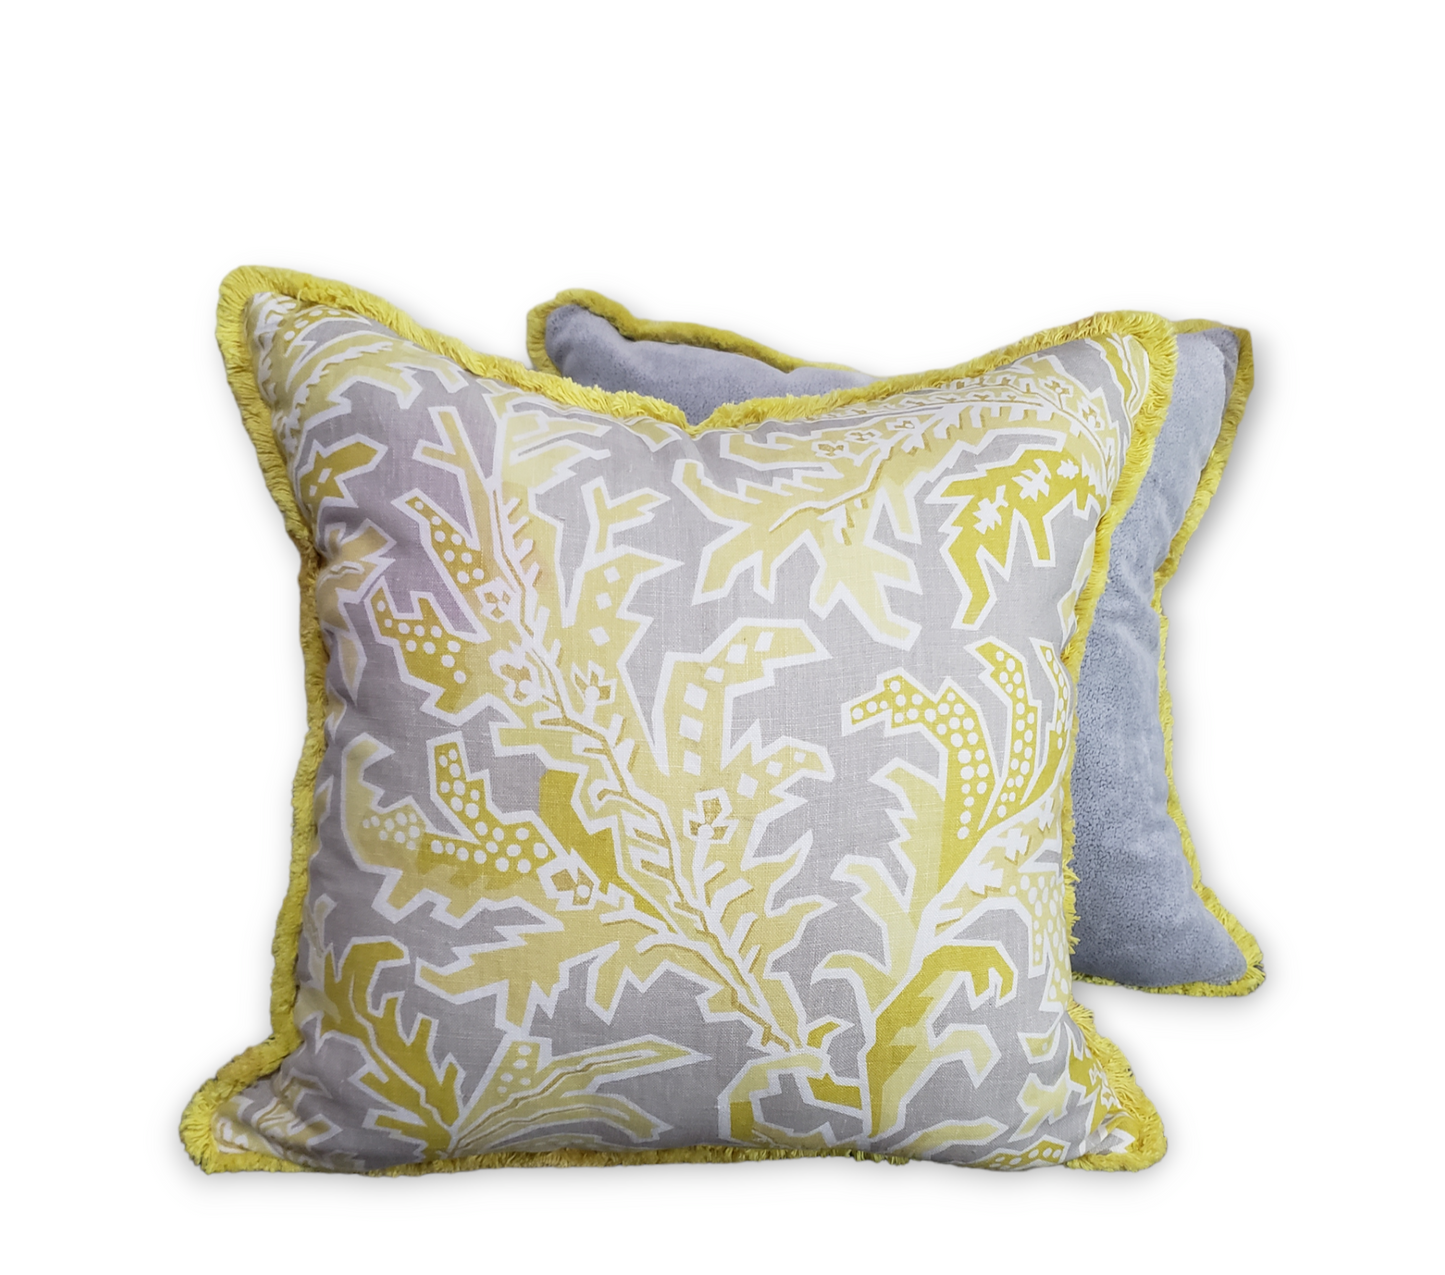 Invite a touch of finesse to your home with the Kimberly Buttercup Luxury Throw Pillow. This designer cushion cover, crafted with Duralee fabric, is sure to infuse your space with a hint of sophistication and exclusivity. The delicate yellow color will bring an elegant ambiance to any room.
Highlights 
22x22in 
Pillow Cover and Polyfill Insert 
